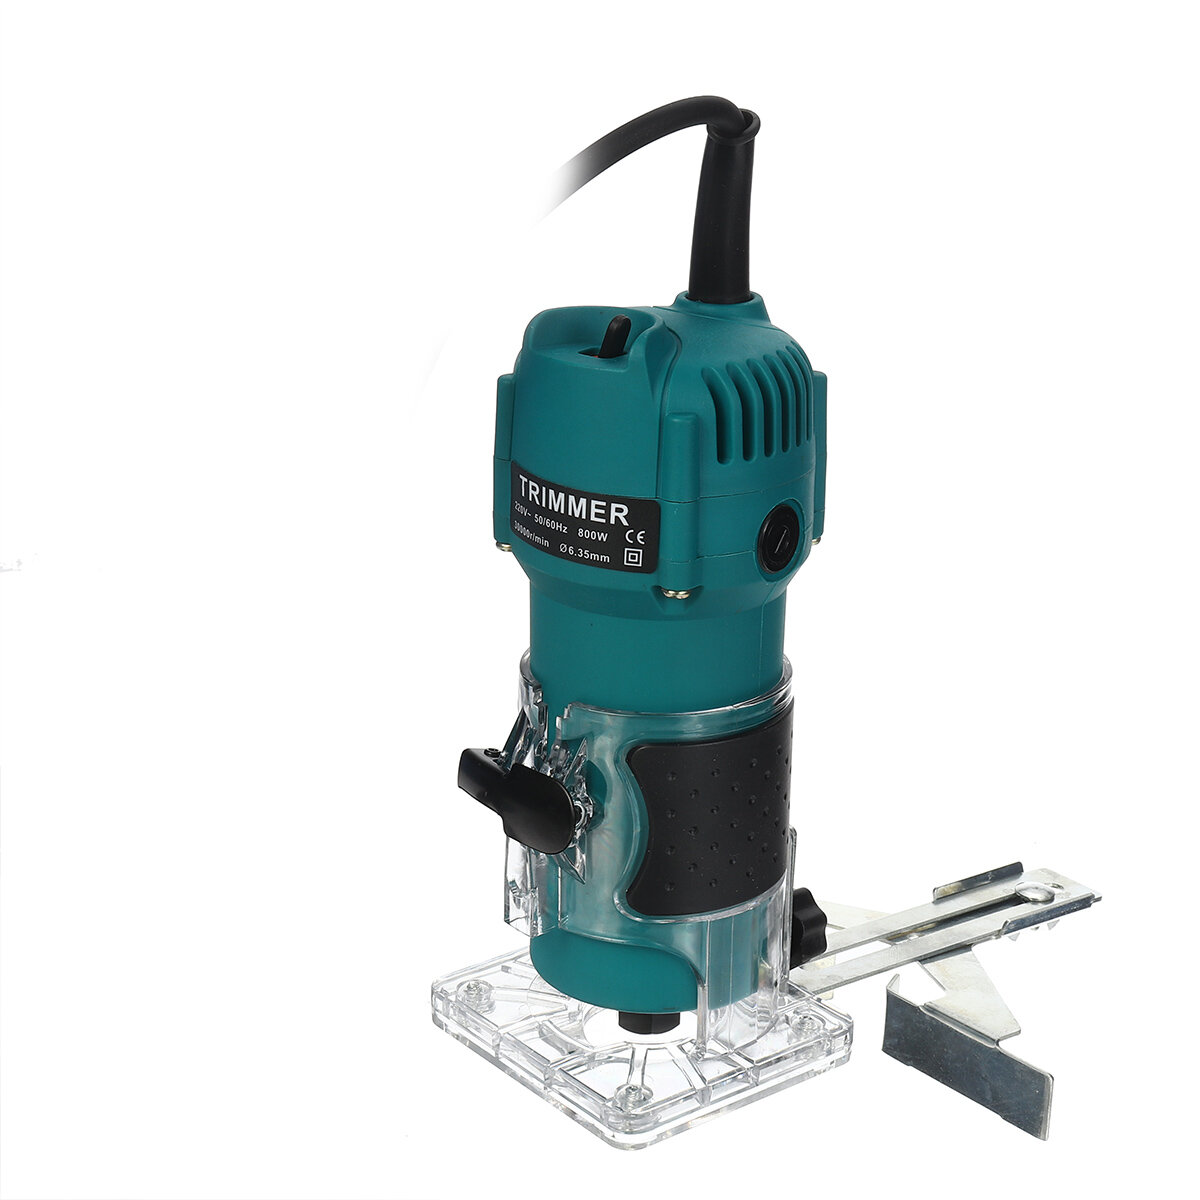 110 V / 220 V 800 W Trim 30000 RPM Router Rand Hout Schoon Snijdt Power Houtbewerking Tool